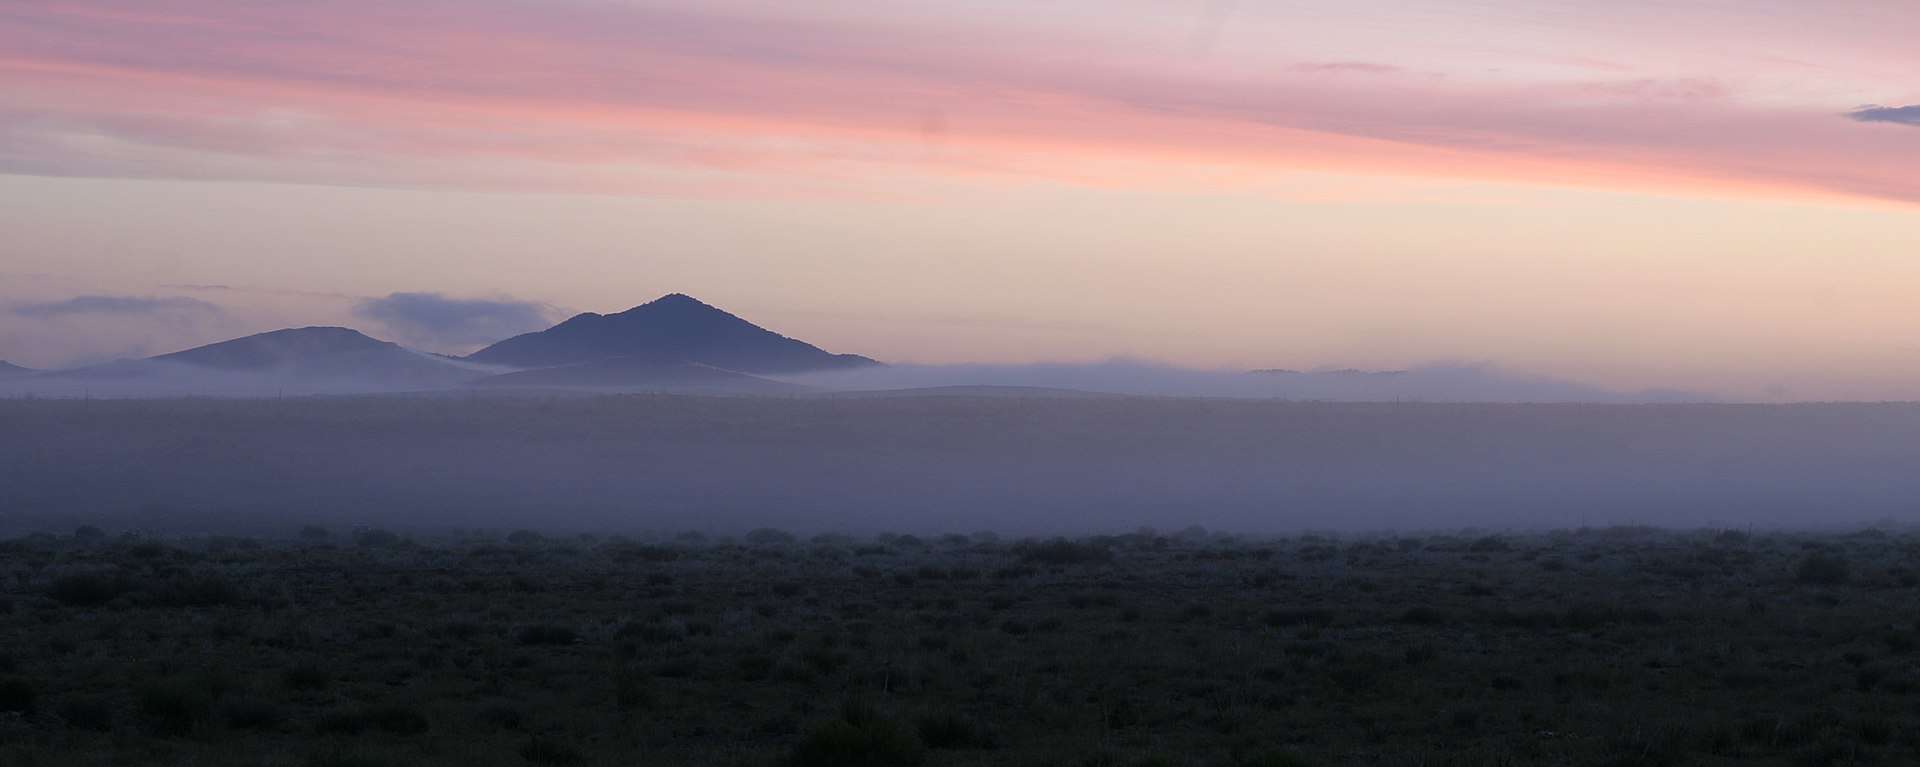 View of the Wet Mountain Valley in the San Isabel National Forest, shrouded in a morning mist